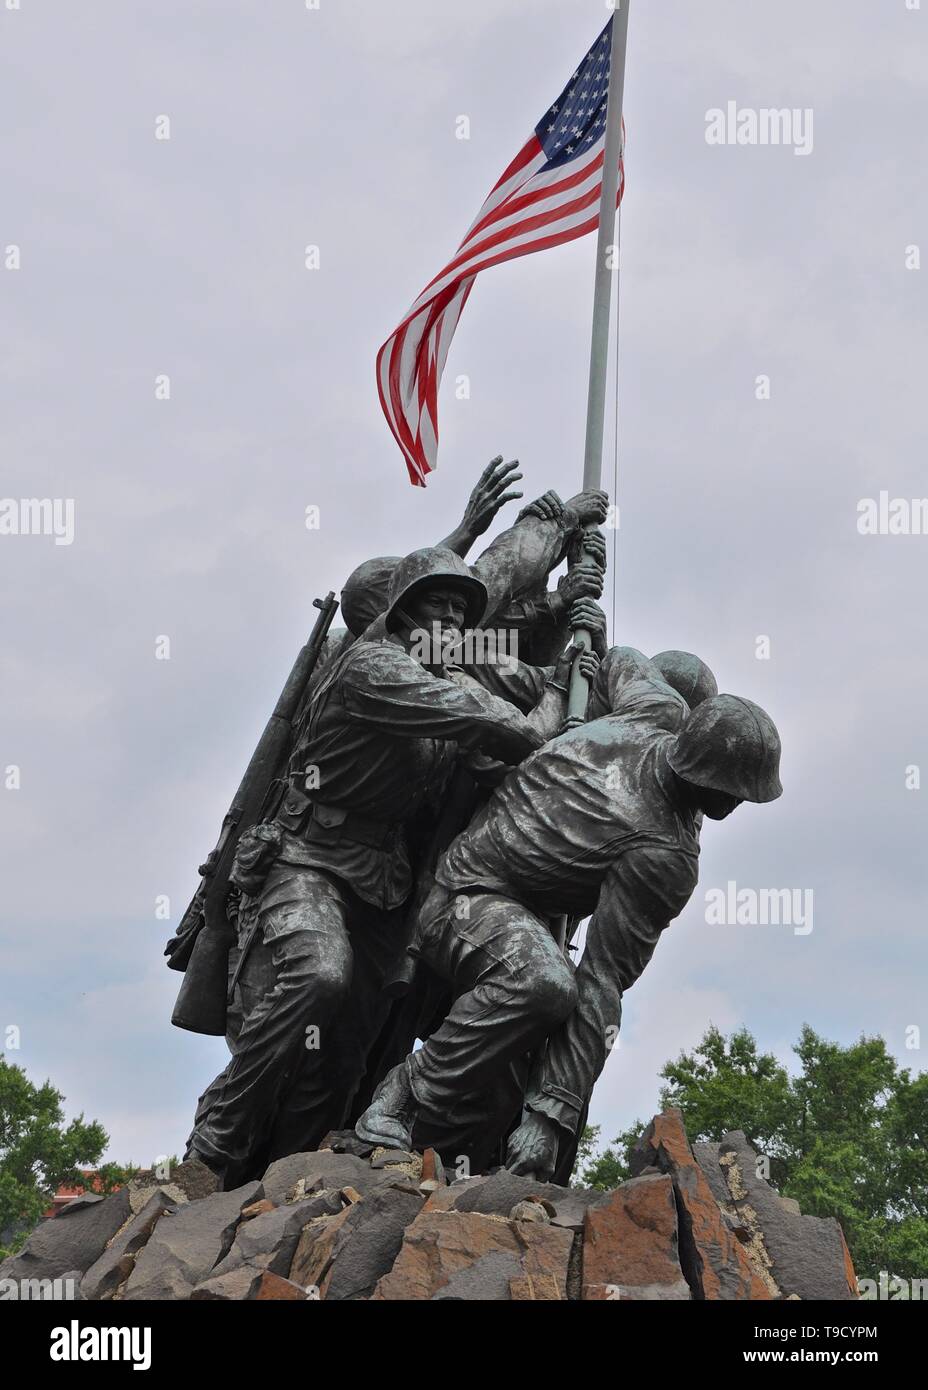 The U.S. Marine Corps War Memorial in Arlington, Virginia, which depicts the raising of the American flag during the Battle of Iwo Jima in WWII. Stock Photo